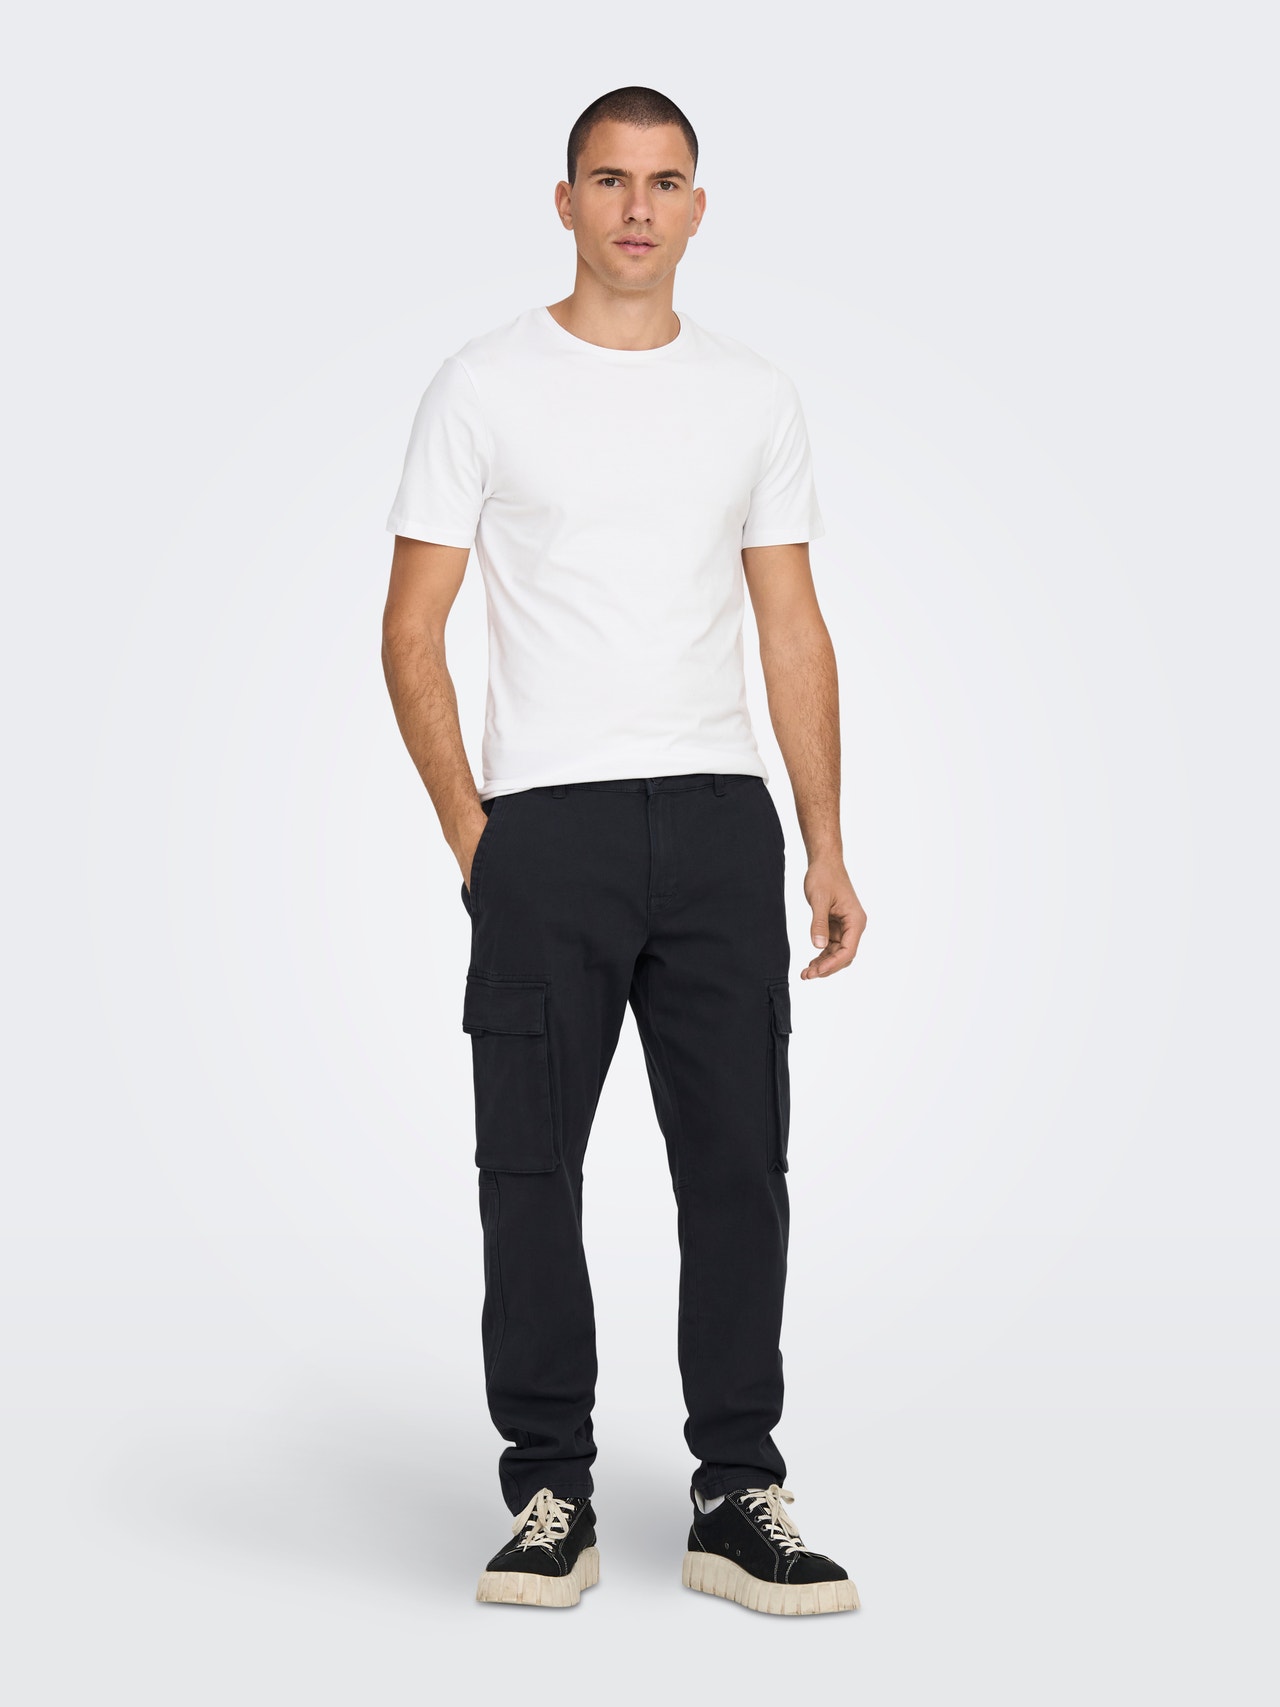 ONLY & SONS ONSNEED CARGO 4563 PANT -Dark Navy - 22024563